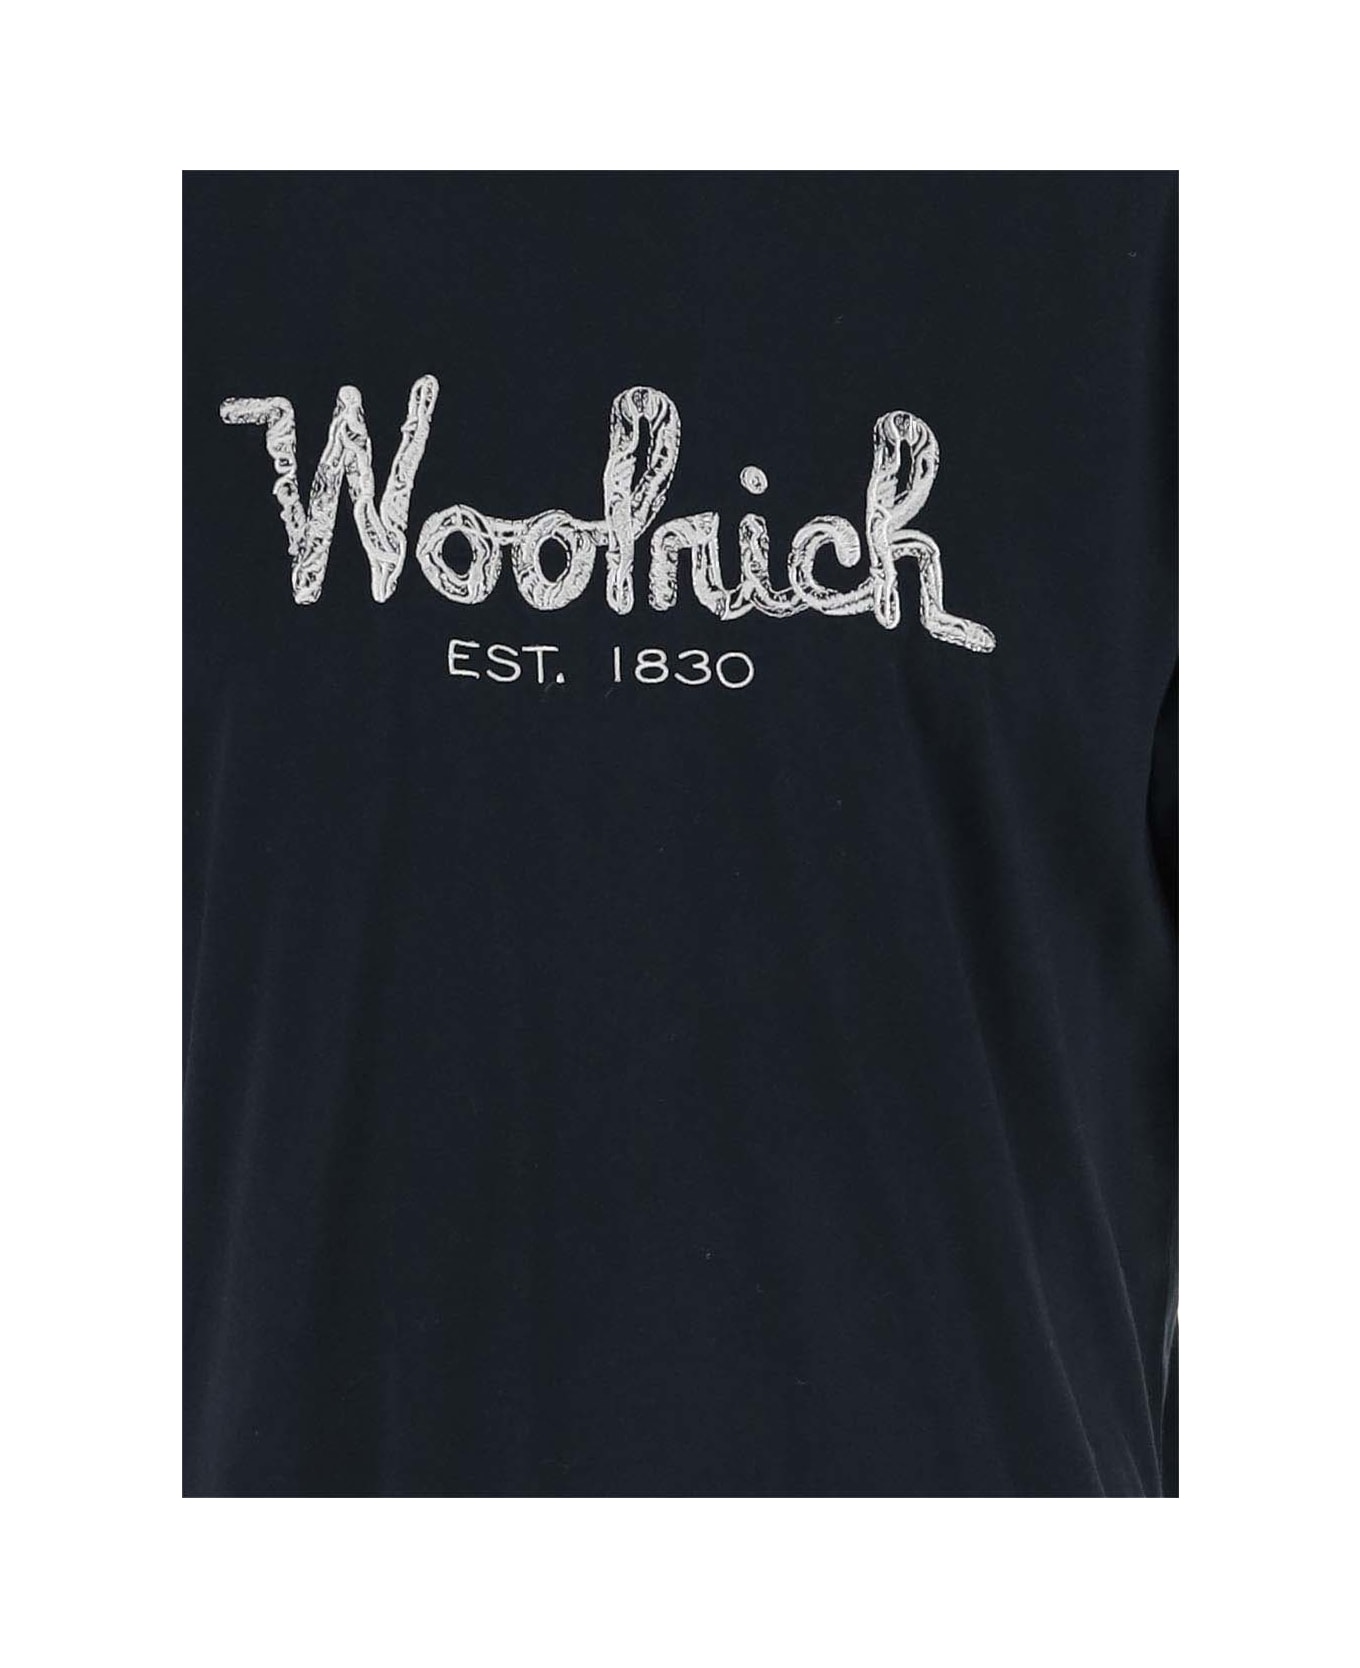 Woolrich Cotton T-shirt With Logo - Black シャツ